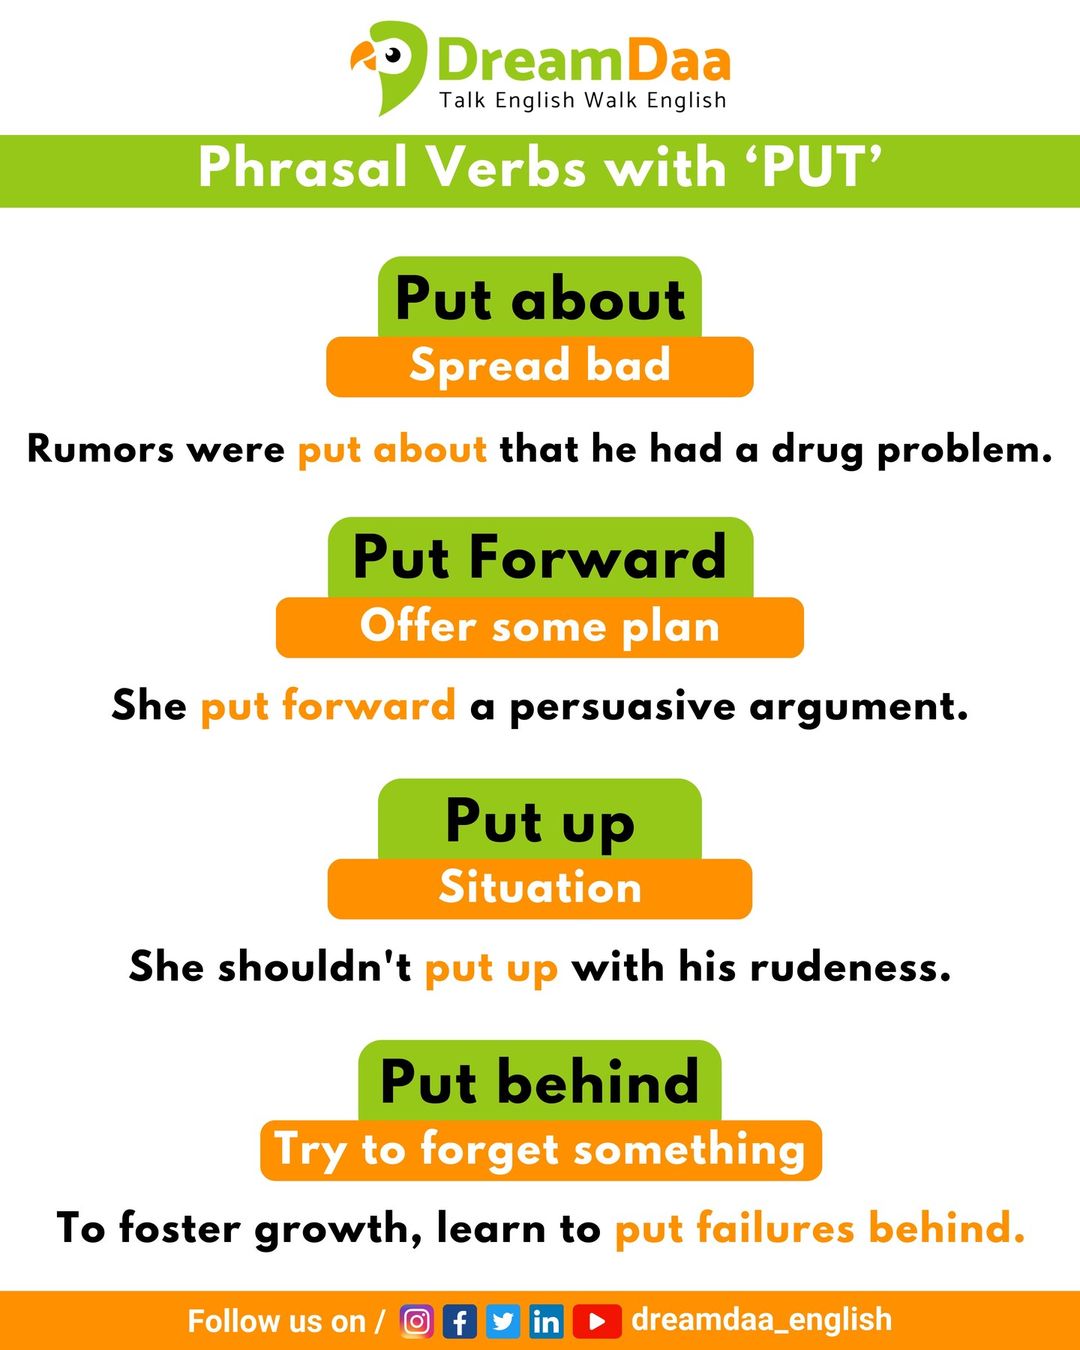 Follow @dreamdaa_english for more
Phrasal verbs with “Let” and “Put”
DreamD...